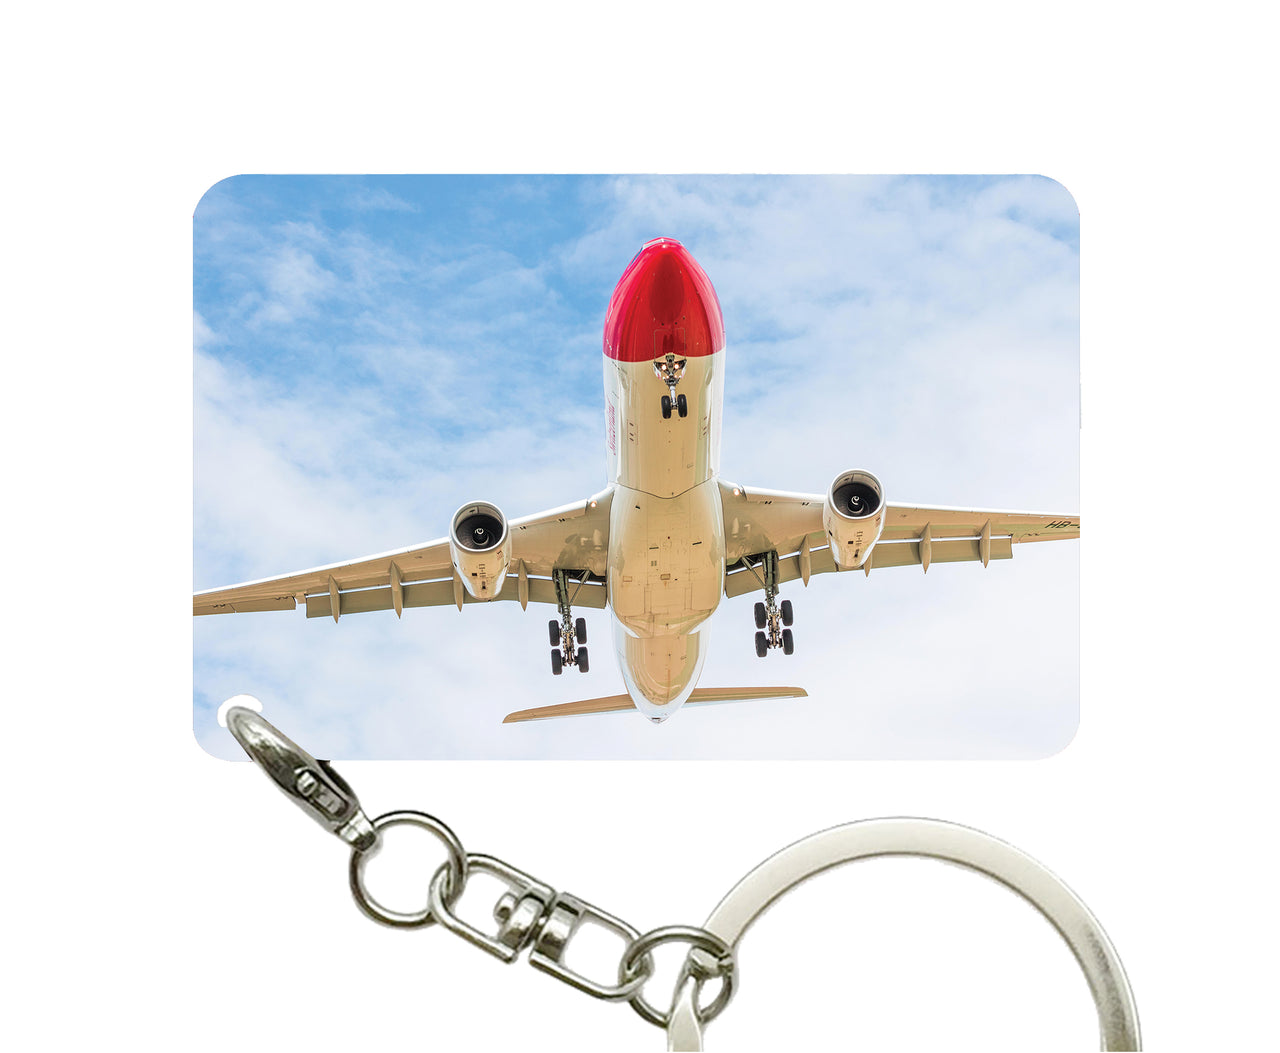 Beautiful Airbus A330 on Approach copy Designed Key Chains